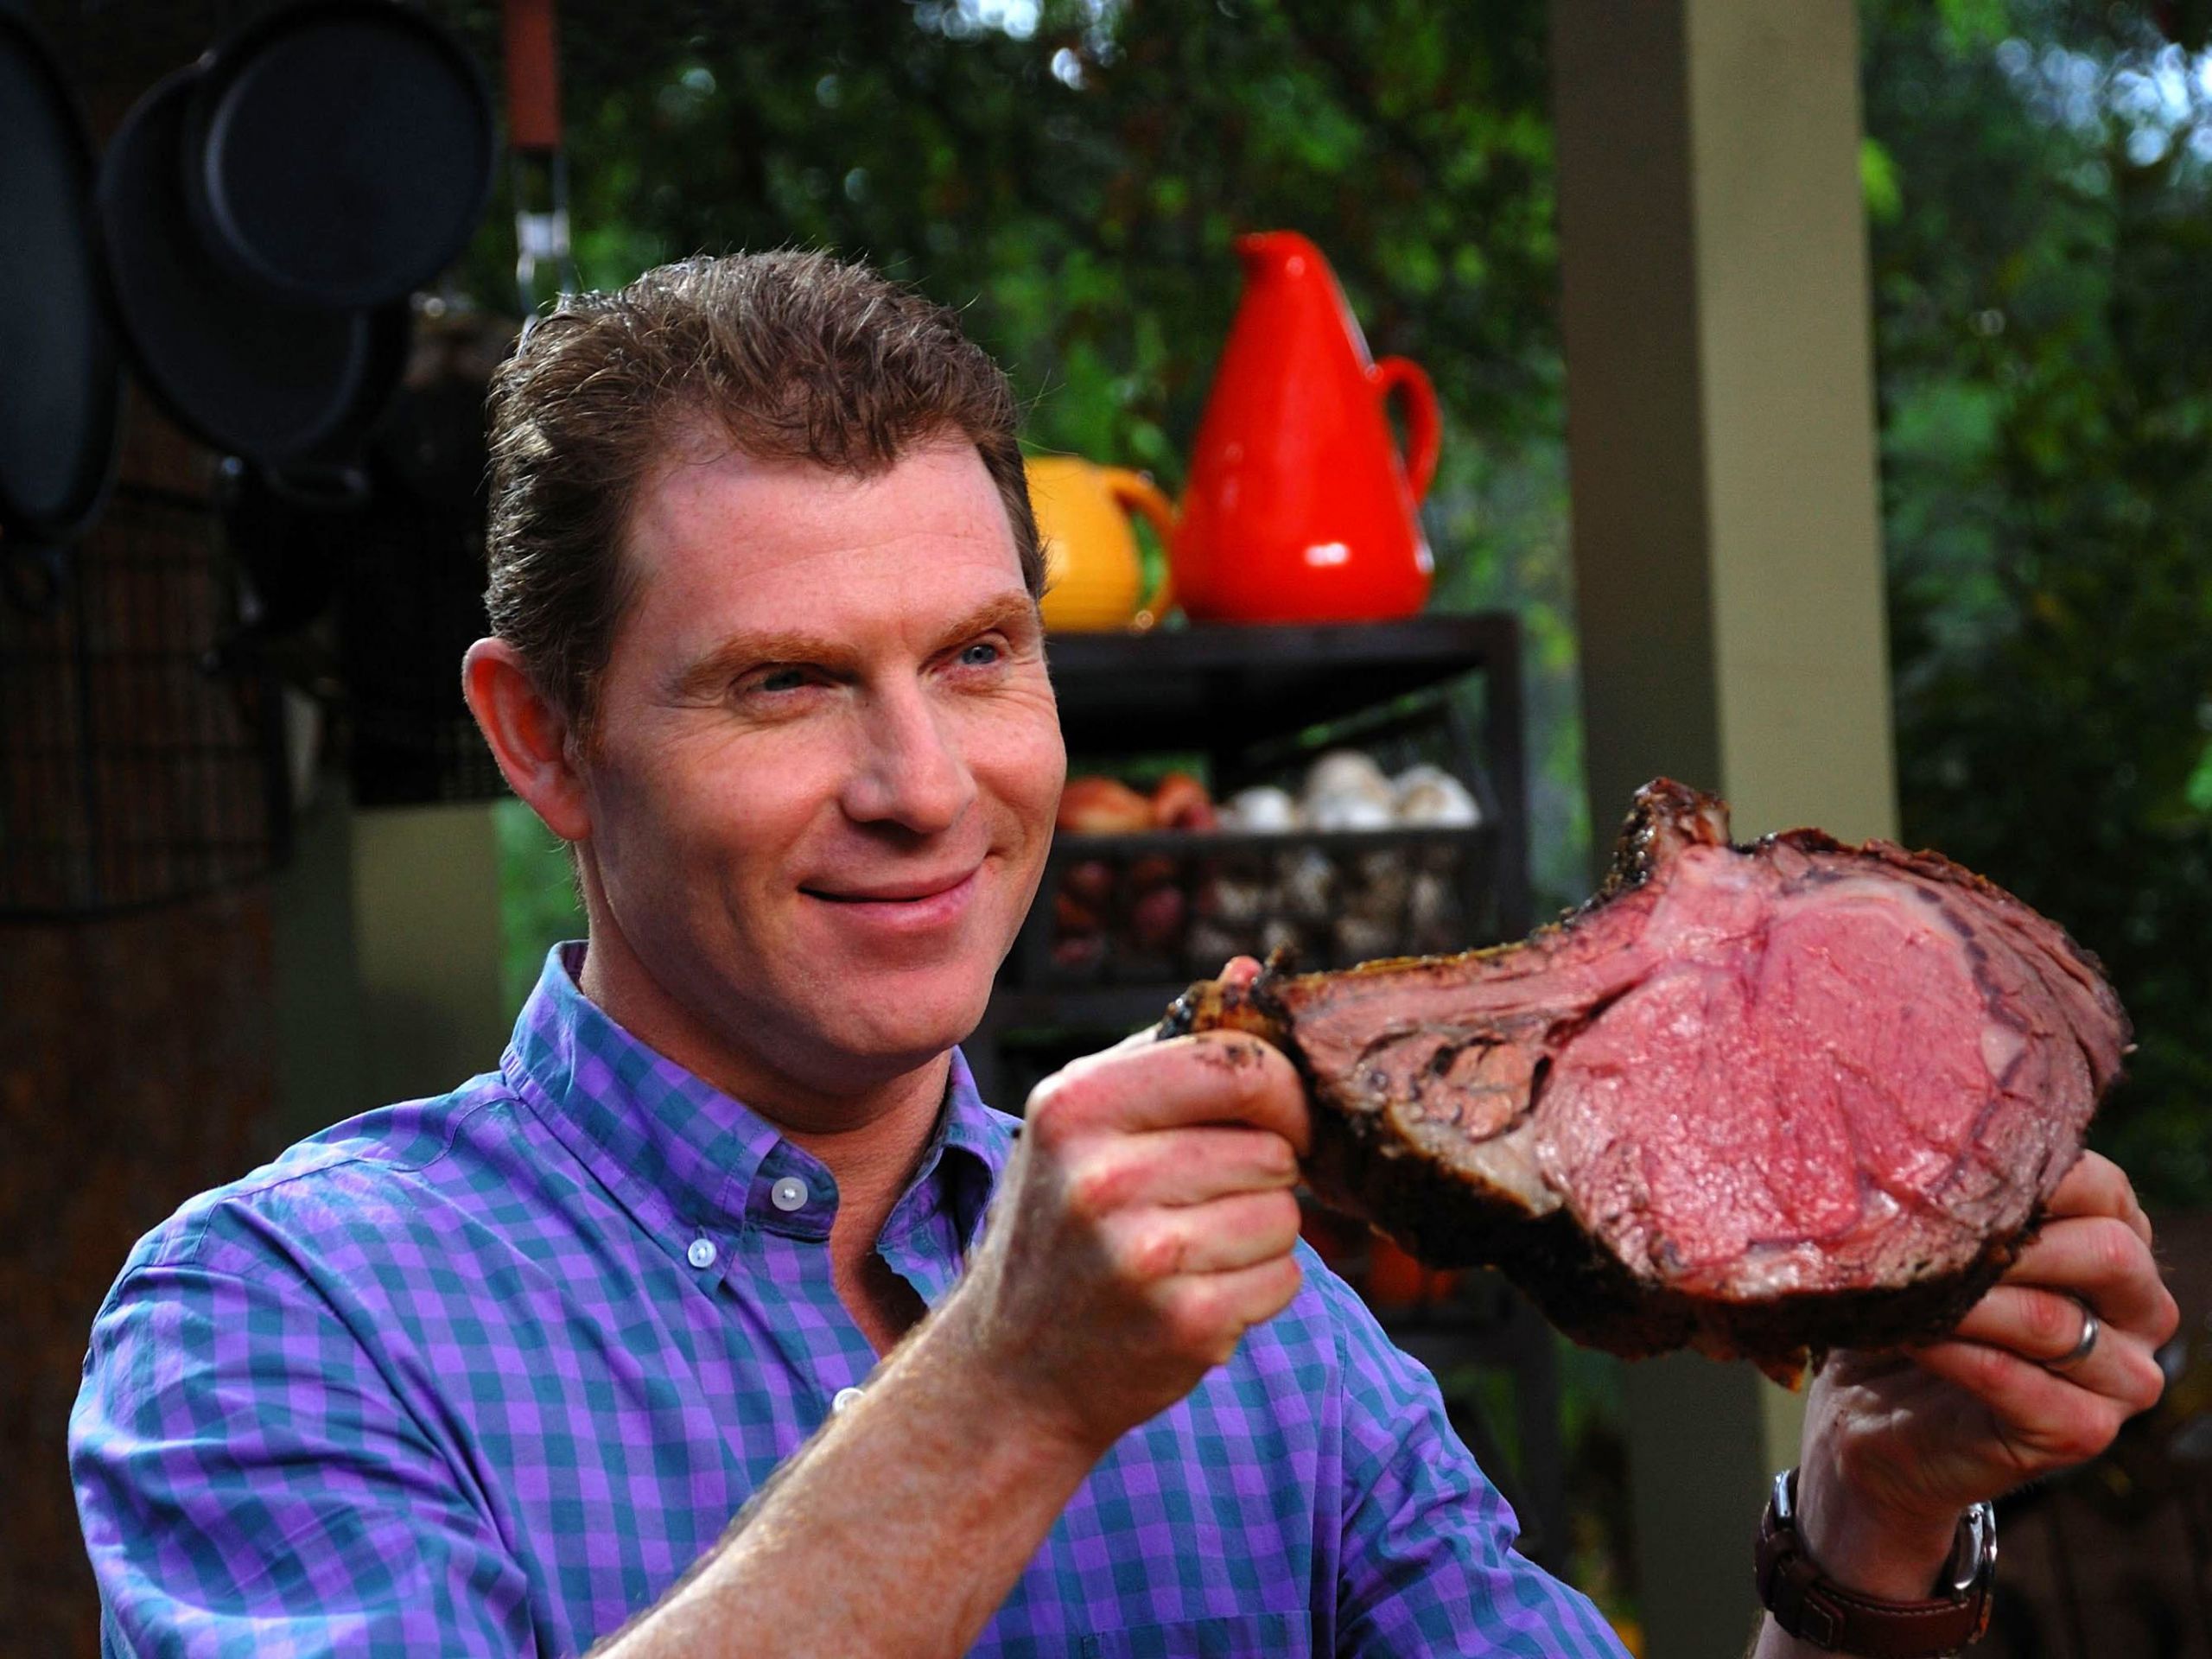 Prime Rib Side Dishes Food Network
 Bobby Flay s Best Summer Grilling Recipes